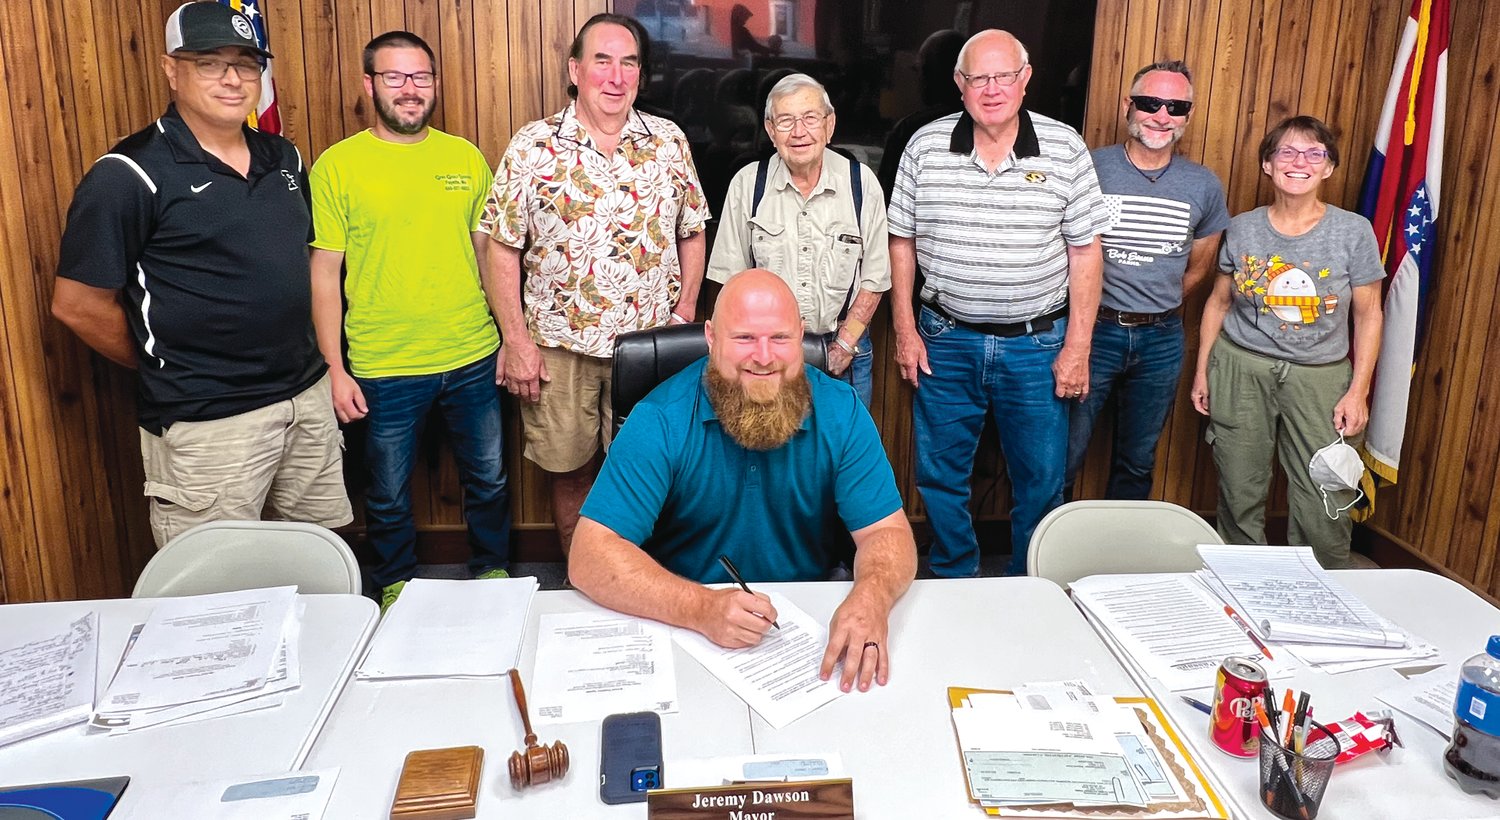 Fayette Mayor Jeremy Dawson signs an Arbor Day proclamation along with past and present members of Fayette’s Tree board. Standing behind Mayor Dawson, from left to right: Ben Roberts, Tree Board Chairman Gene Gerlt, Brian McMillan, honorary board member and tree board founder Clell Solomon, Gale Schaffer, volunteer arborist Mark Thompson, and Southwest Ward Alderwoman and city/board liaison Bekki Galloway.